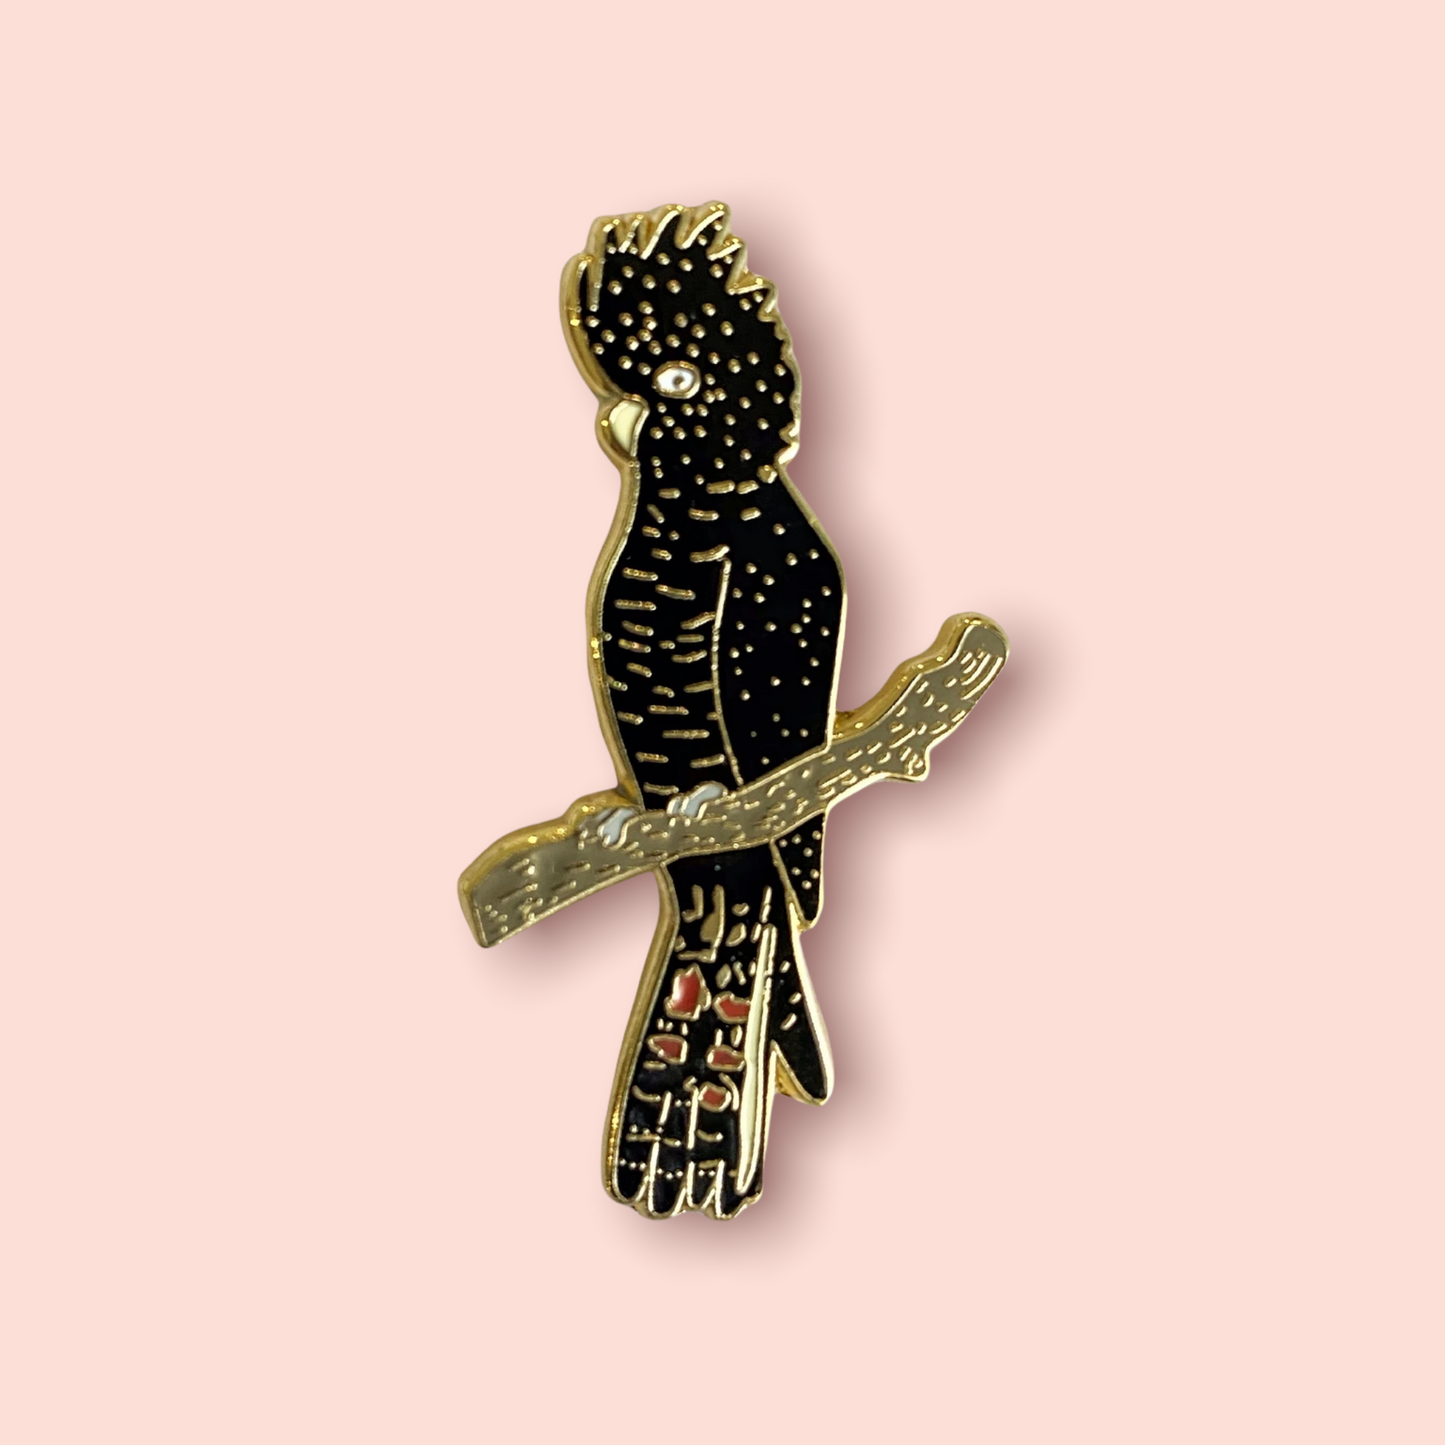 Red-Tailed Black Cockatoo Pin Badge